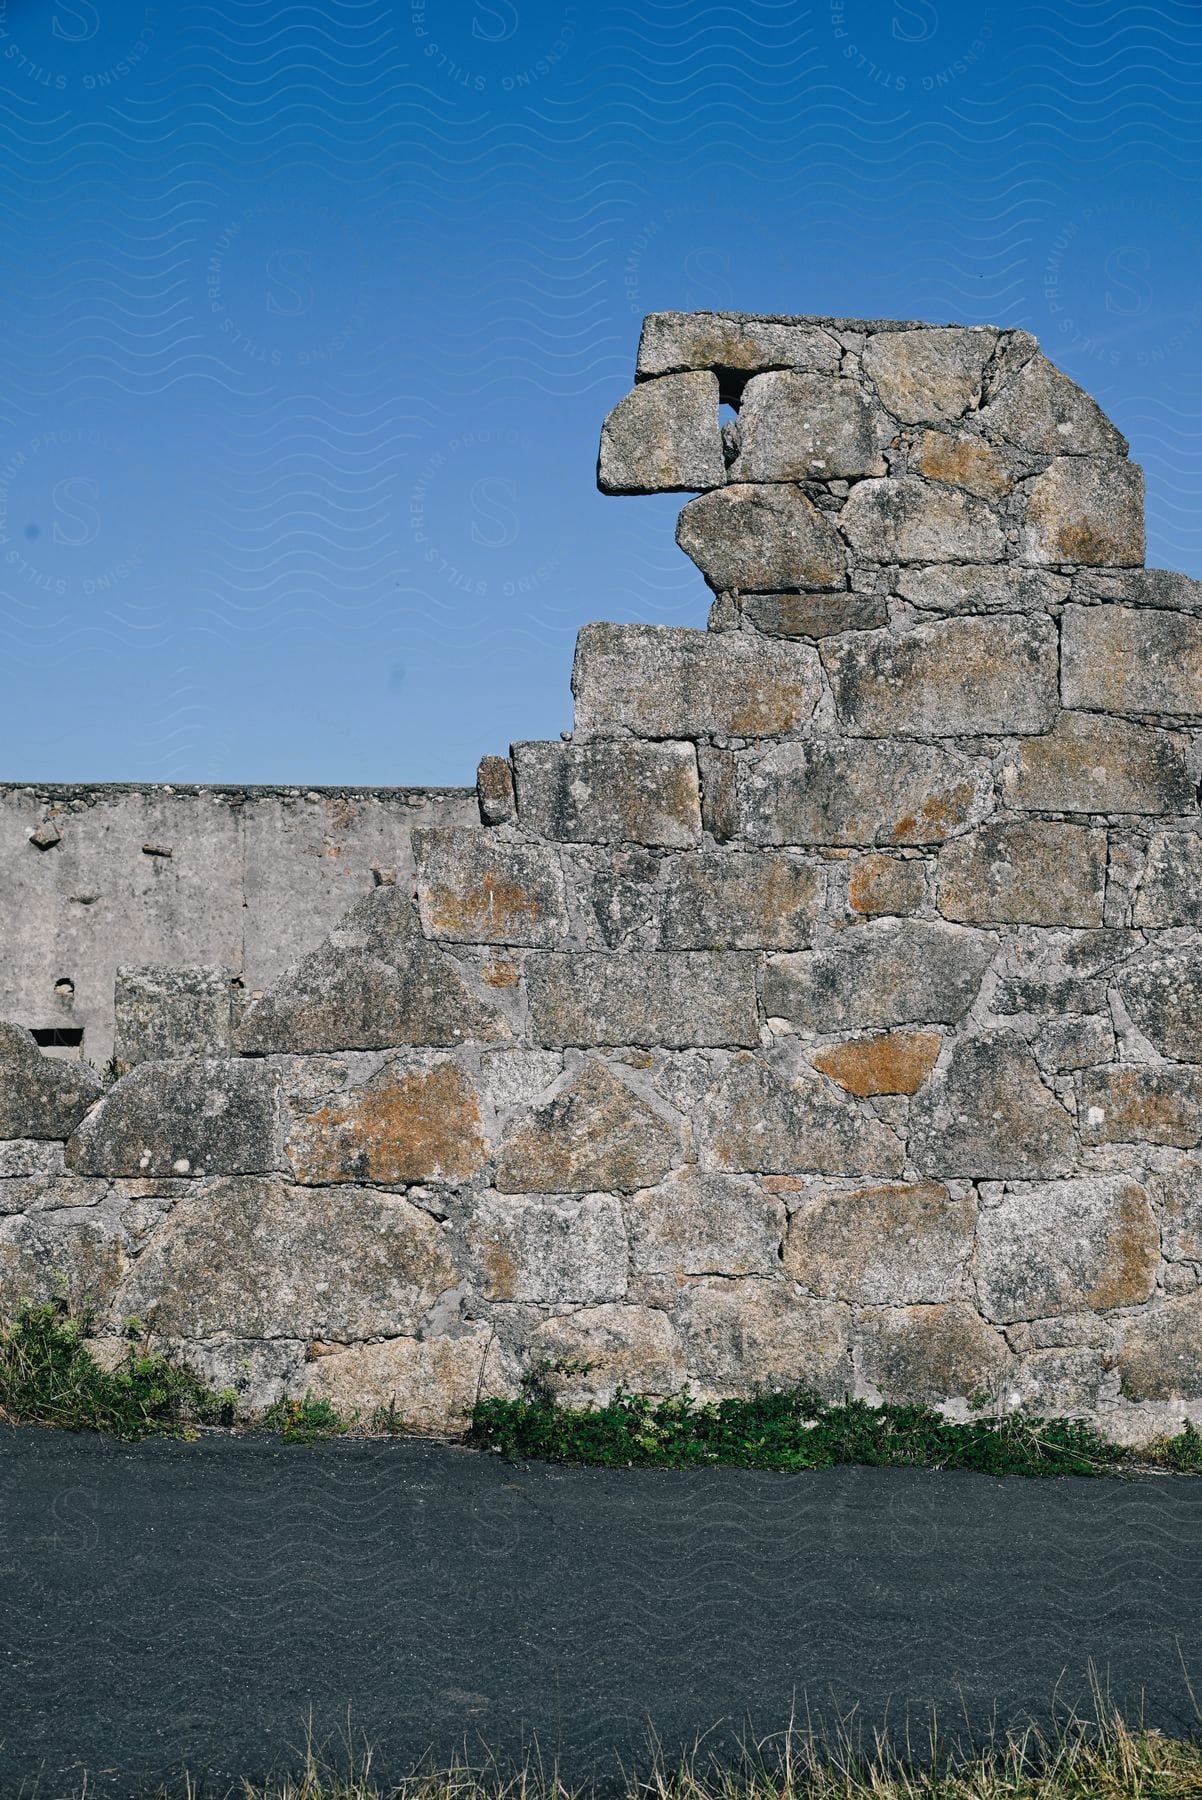 Exterior architecture of a rock wall next to an asphalt against a cloudless blue sky